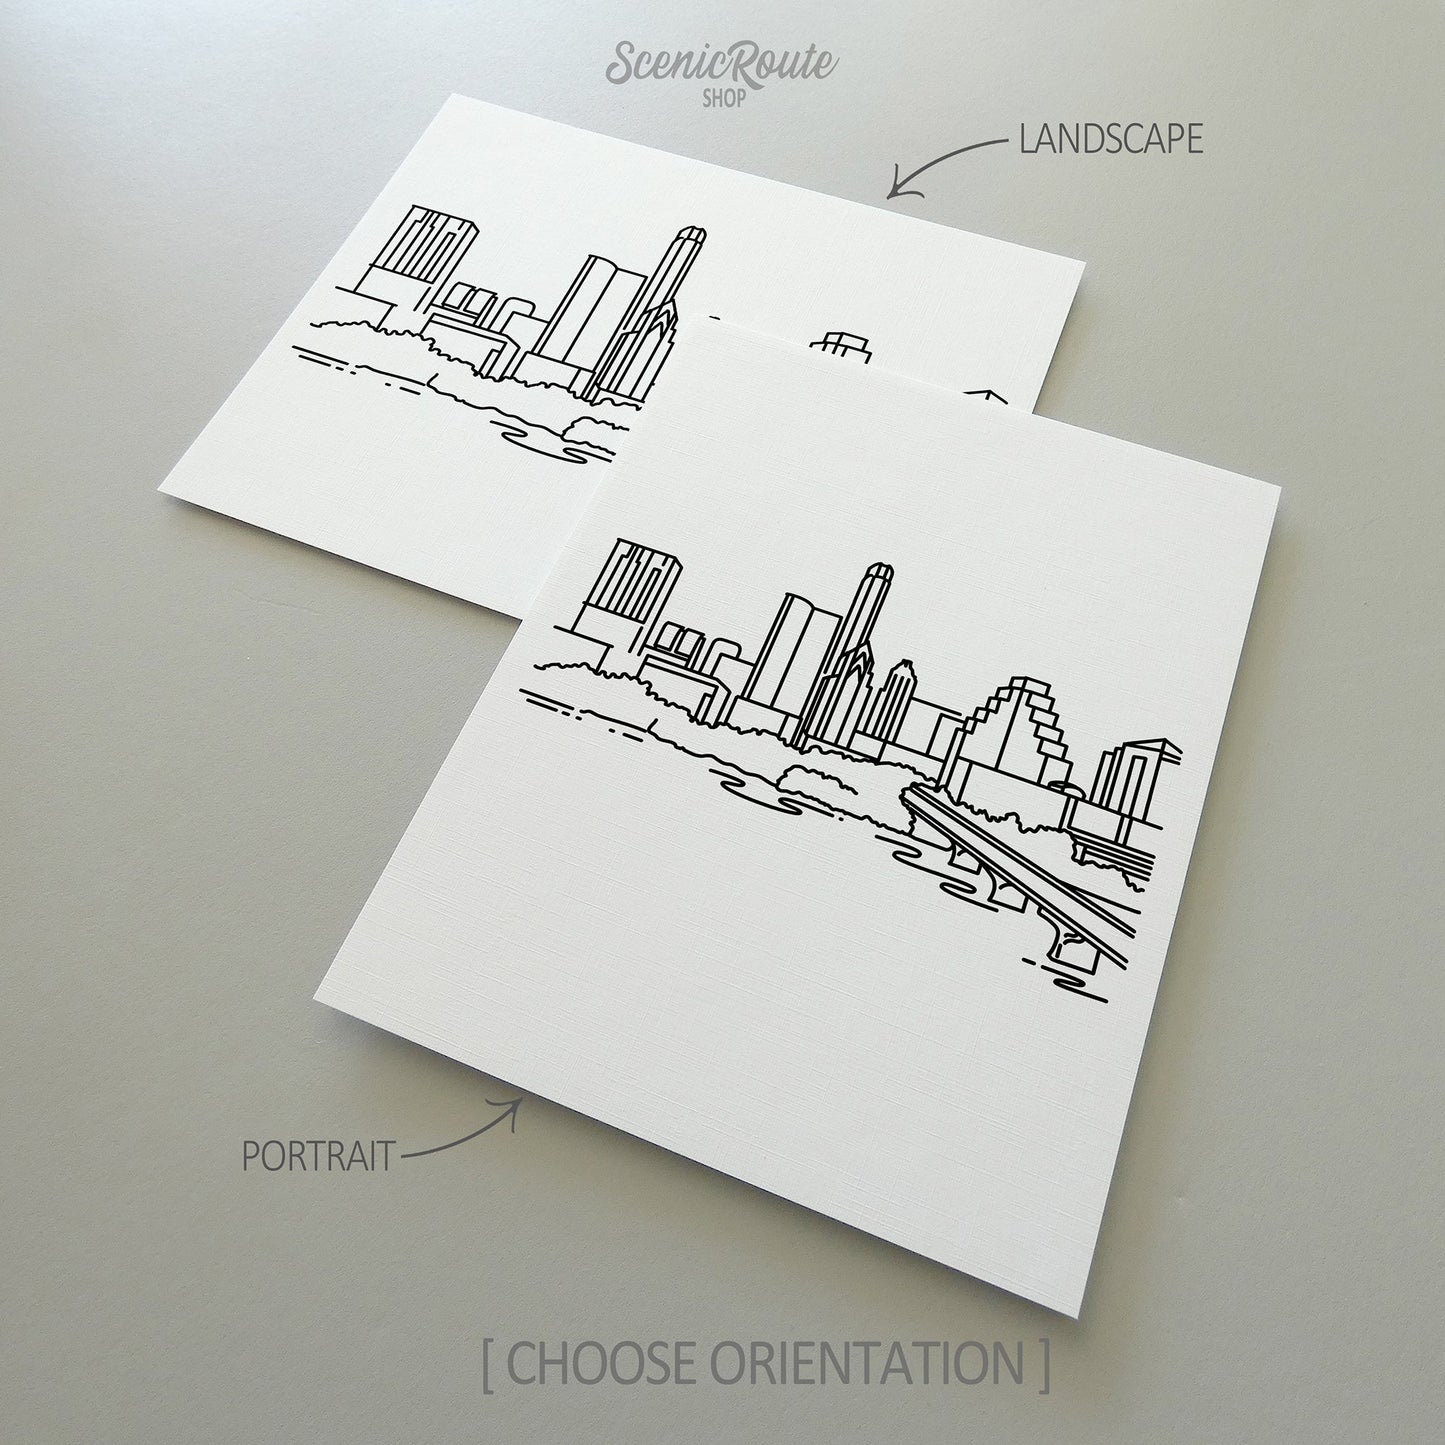 Two line art drawings of the Austin Skyline on white linen paper with a gray background.  The pieces are shown in portrait and landscape orientation for the available art print options.